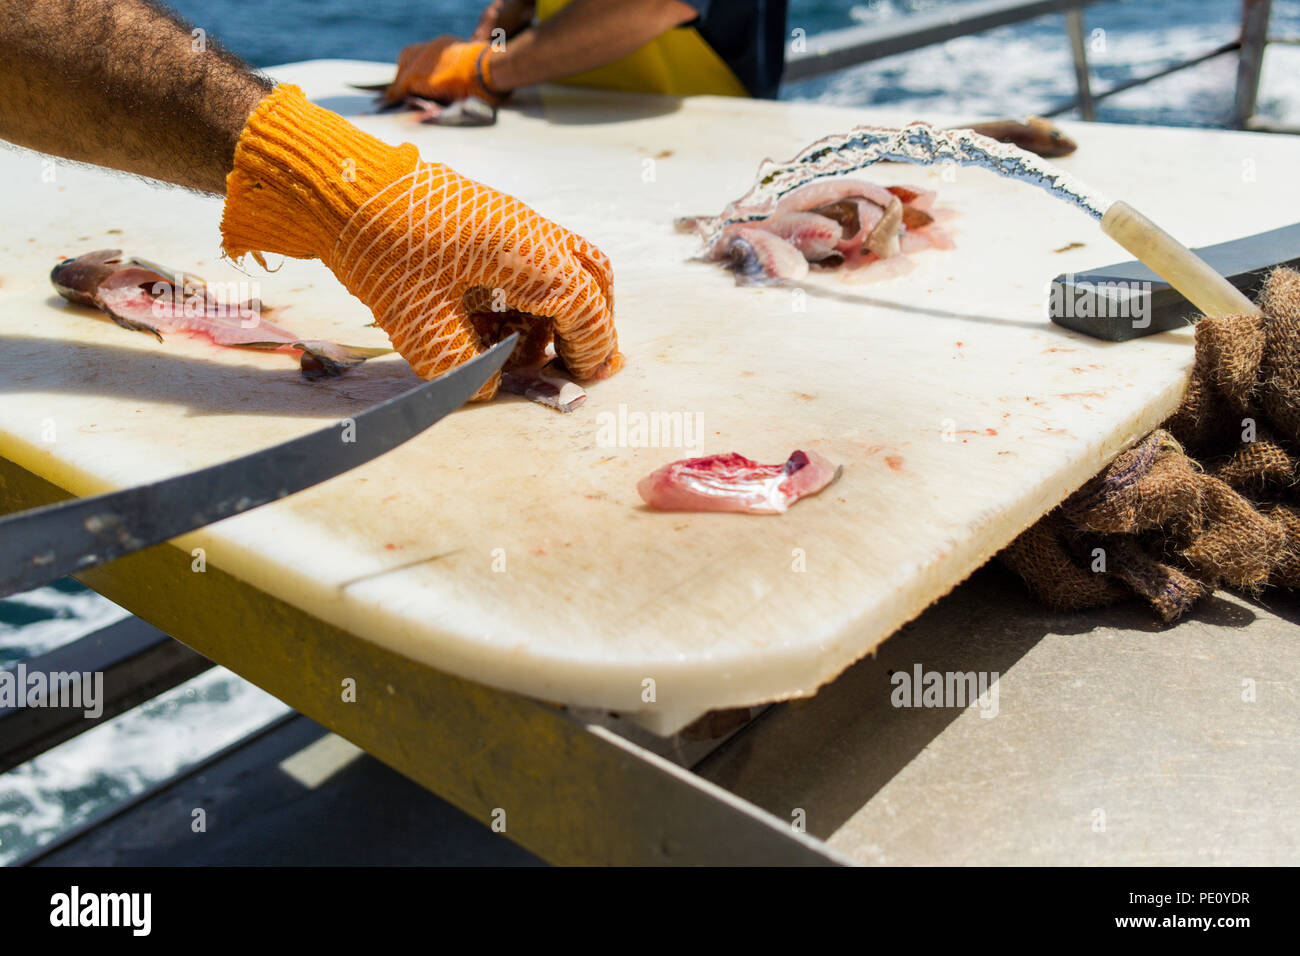 Fisherman wearing gloves cutting fish fillets on cutting board. Fisherman on boat deck preparing fish over looking ocean. Stock Photo